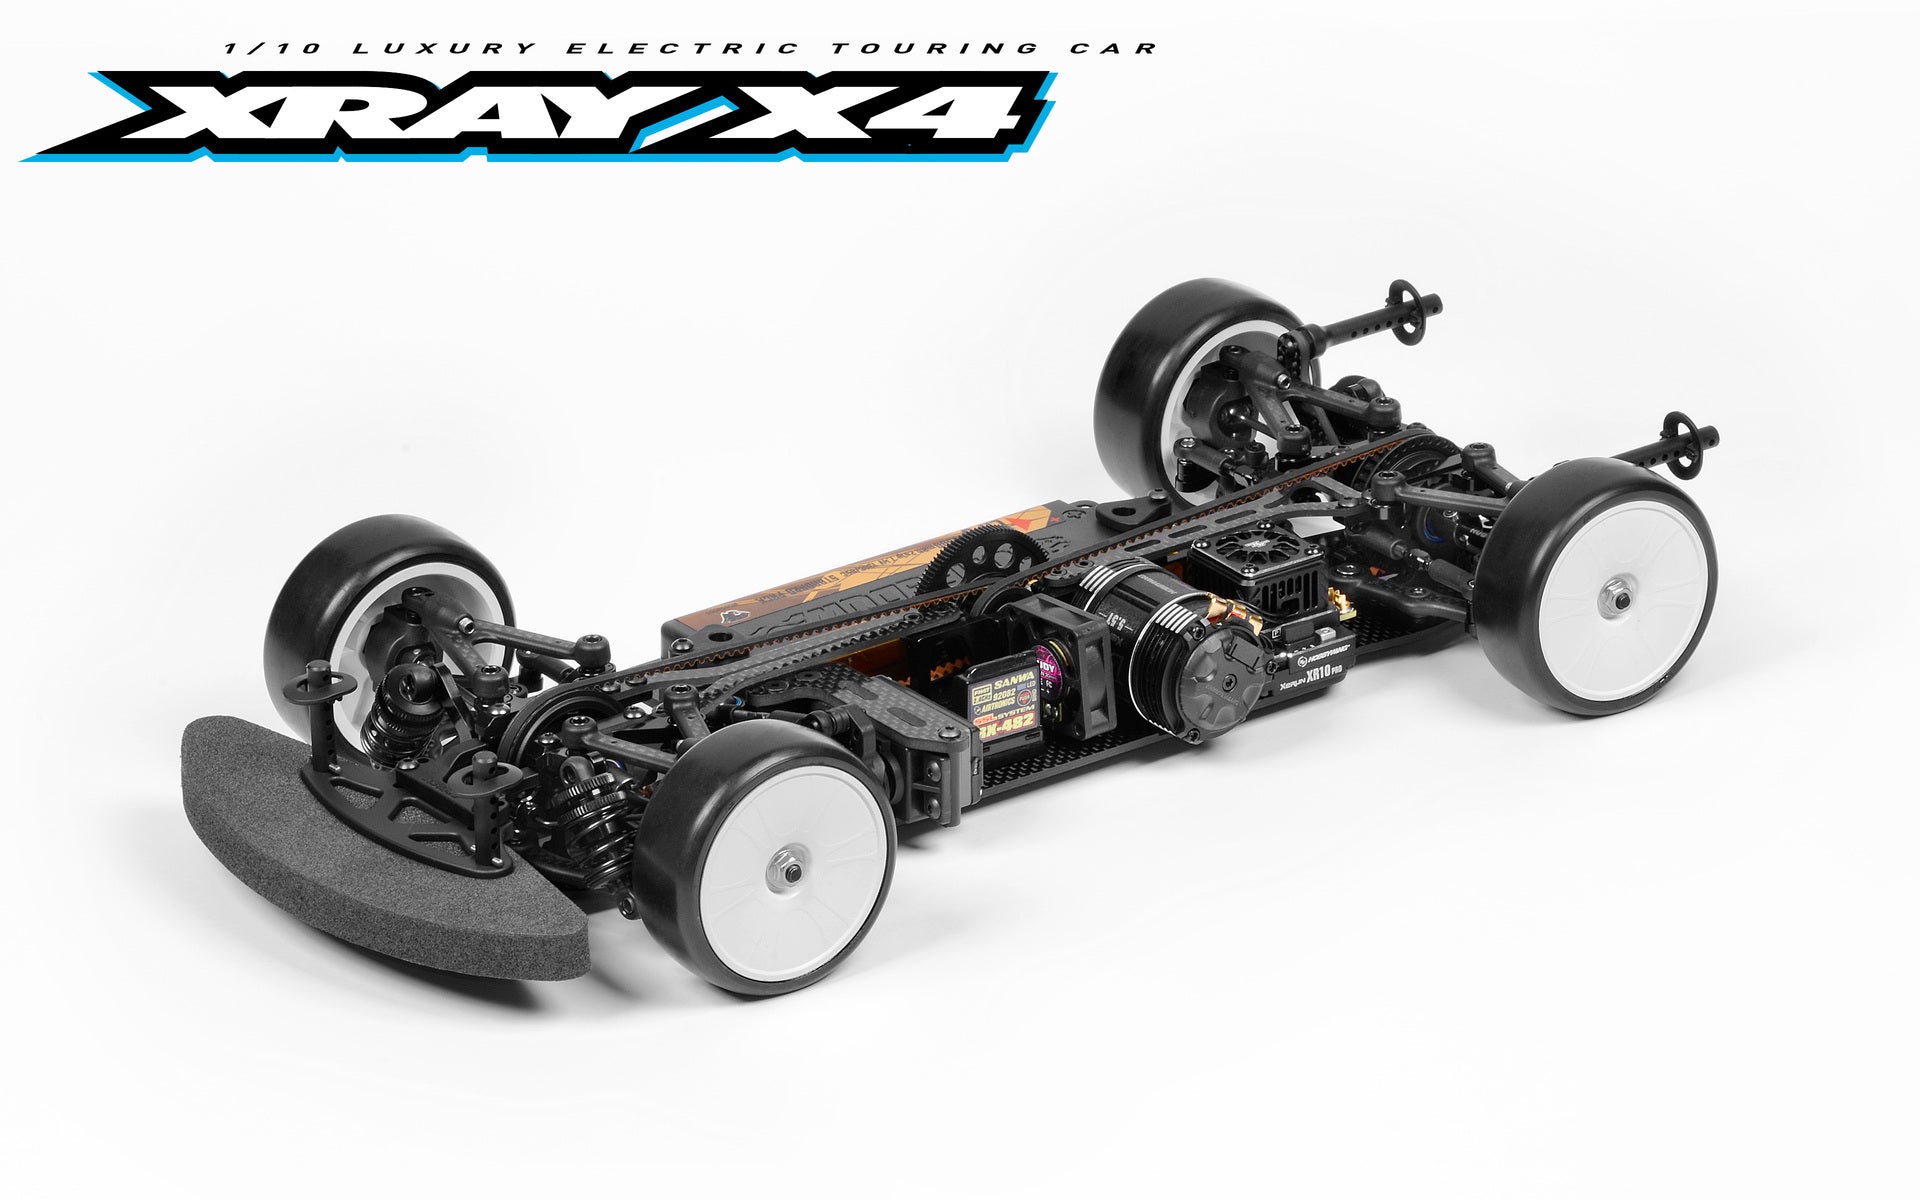 XRAY X4'23 GRAPHITE EDITION 1/10 Luxury Electric Touring Car